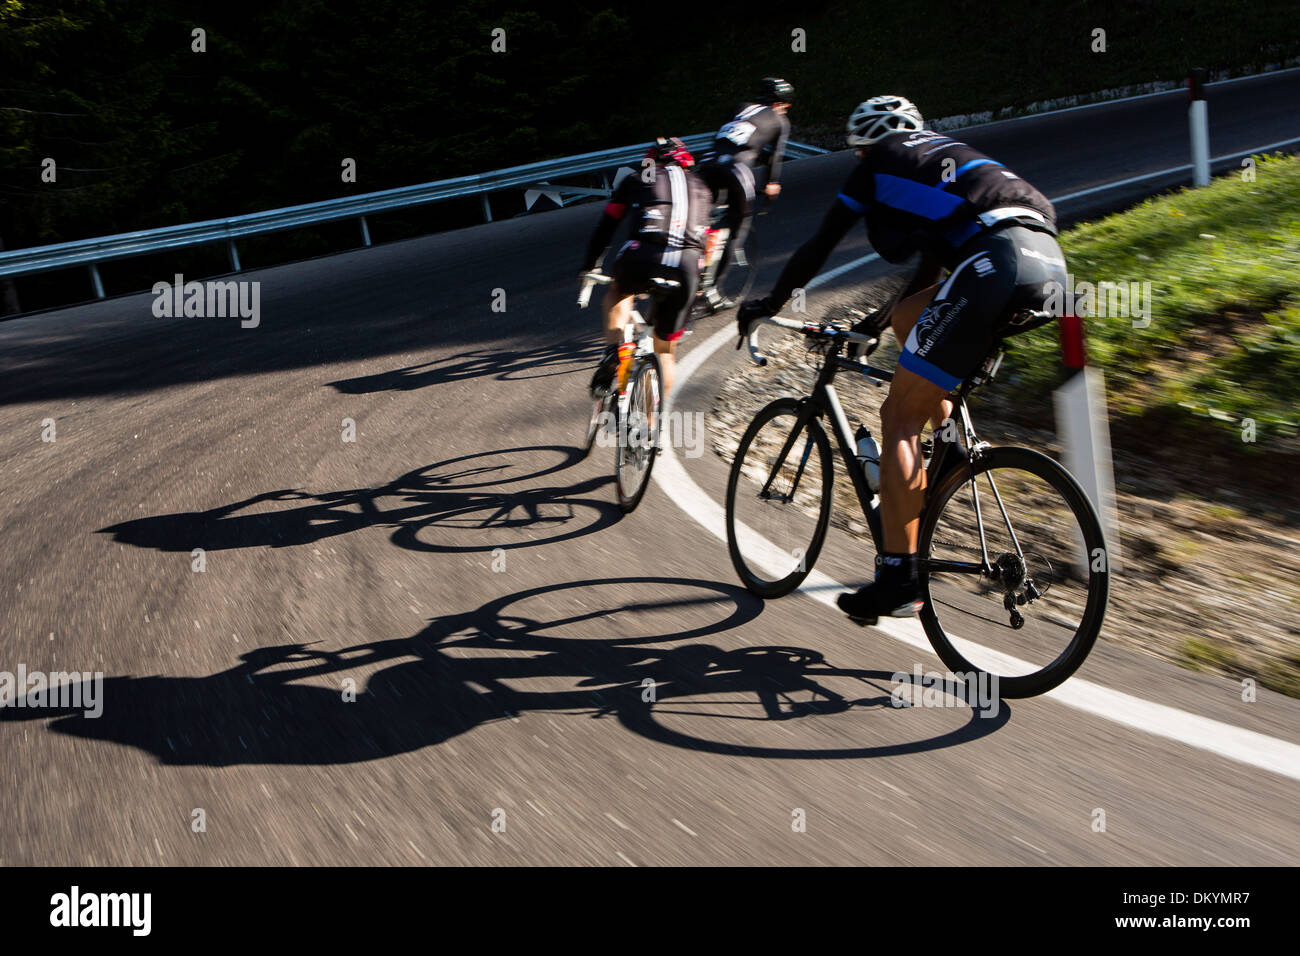 Cyclists round a corner during the Maratona dles Dolomites race in Italy, 2013 Stock Photo